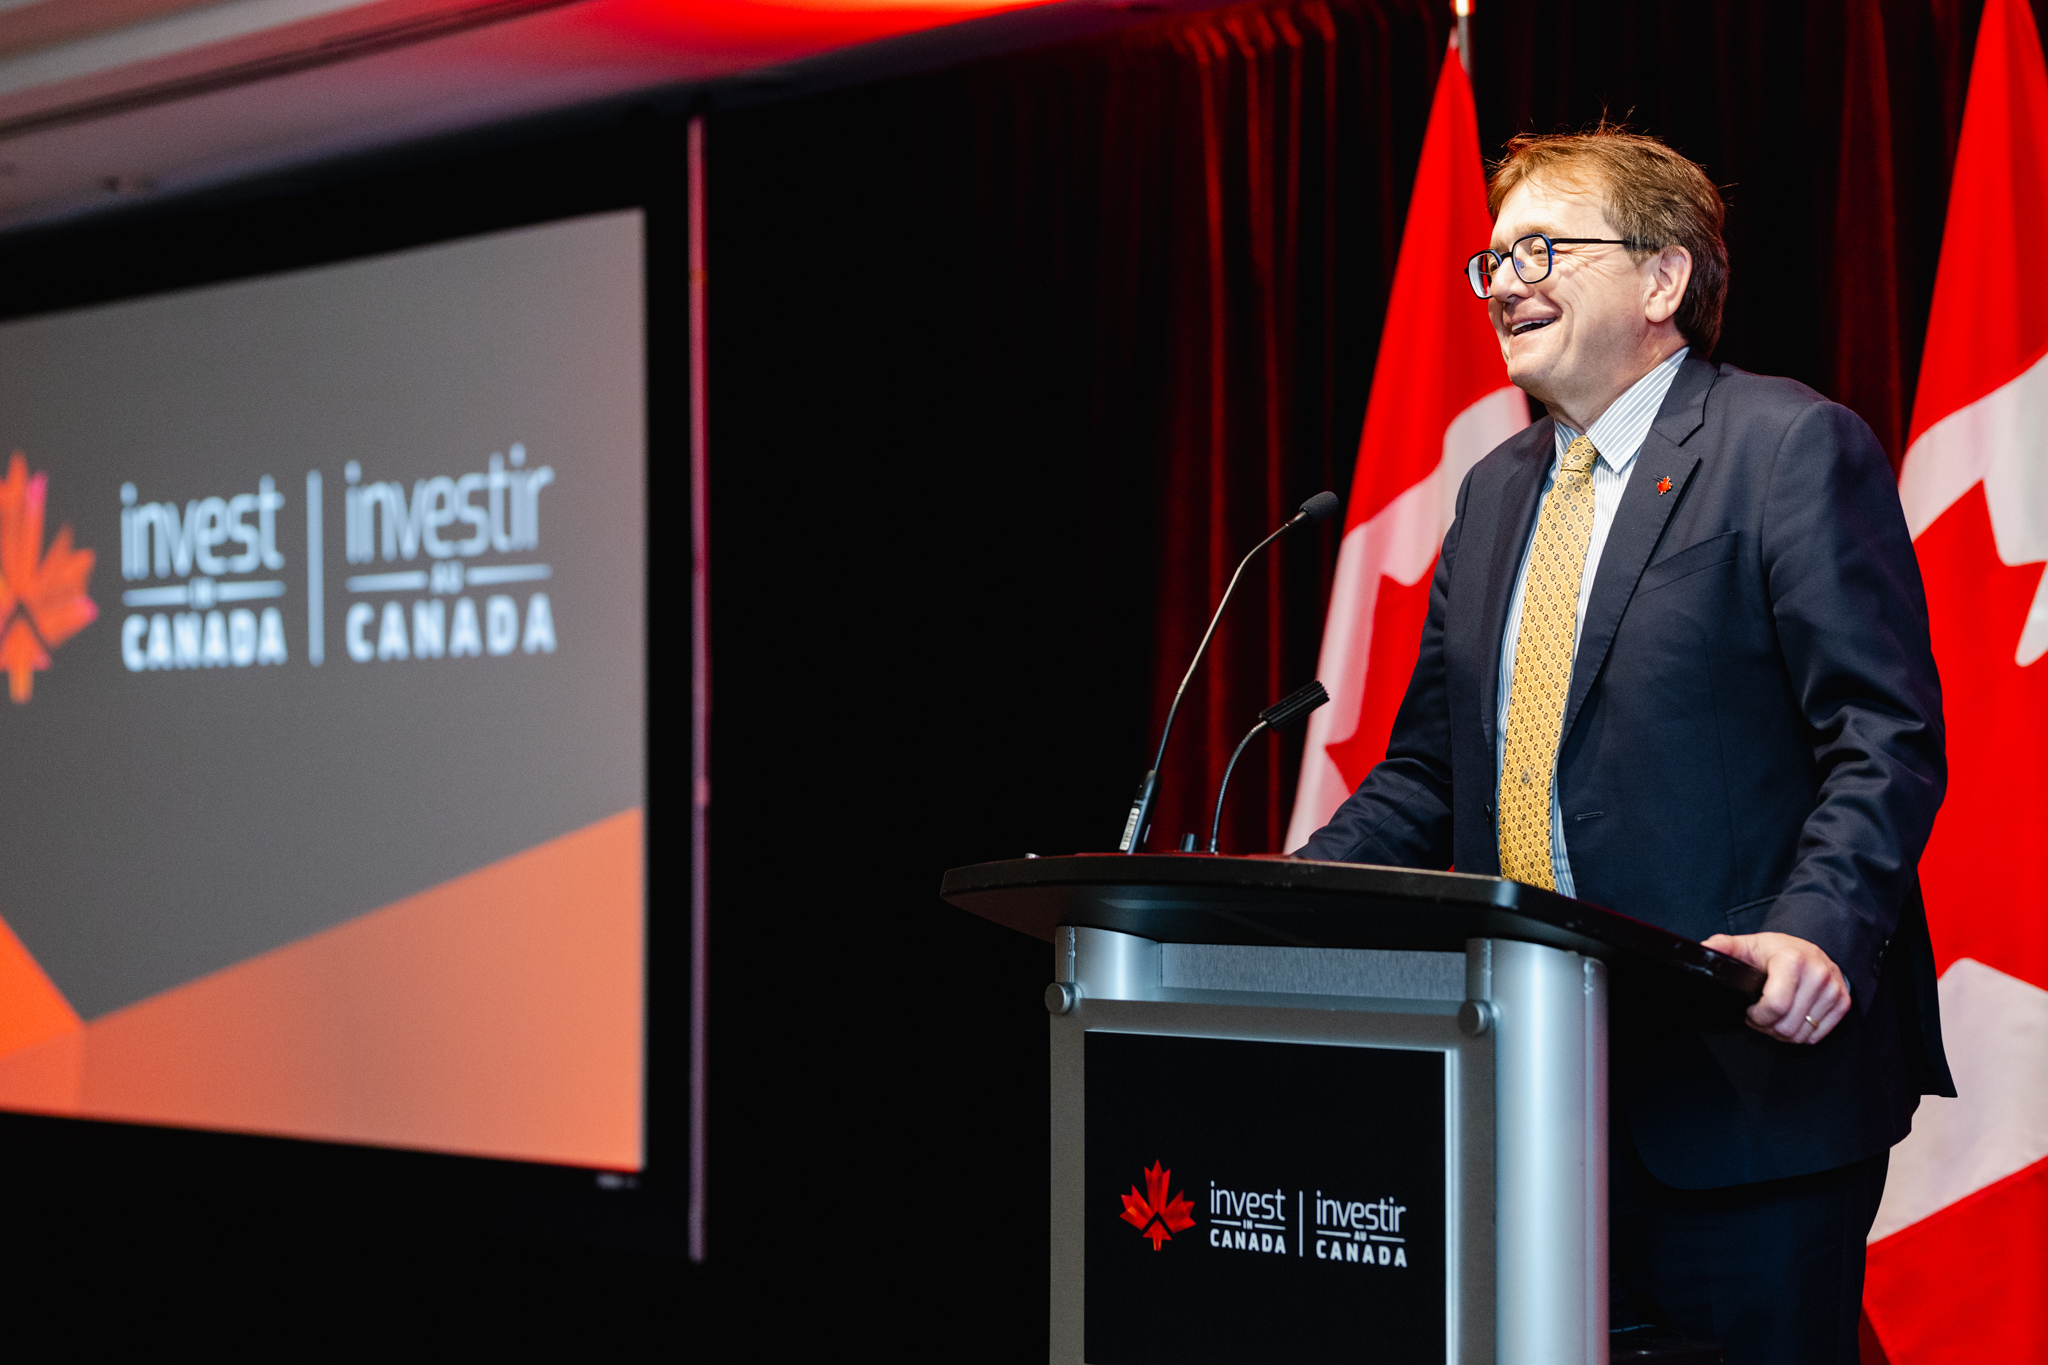 A man speaking at a podium with the "Invest in Canada" logo displayed in the background during an event photography session.